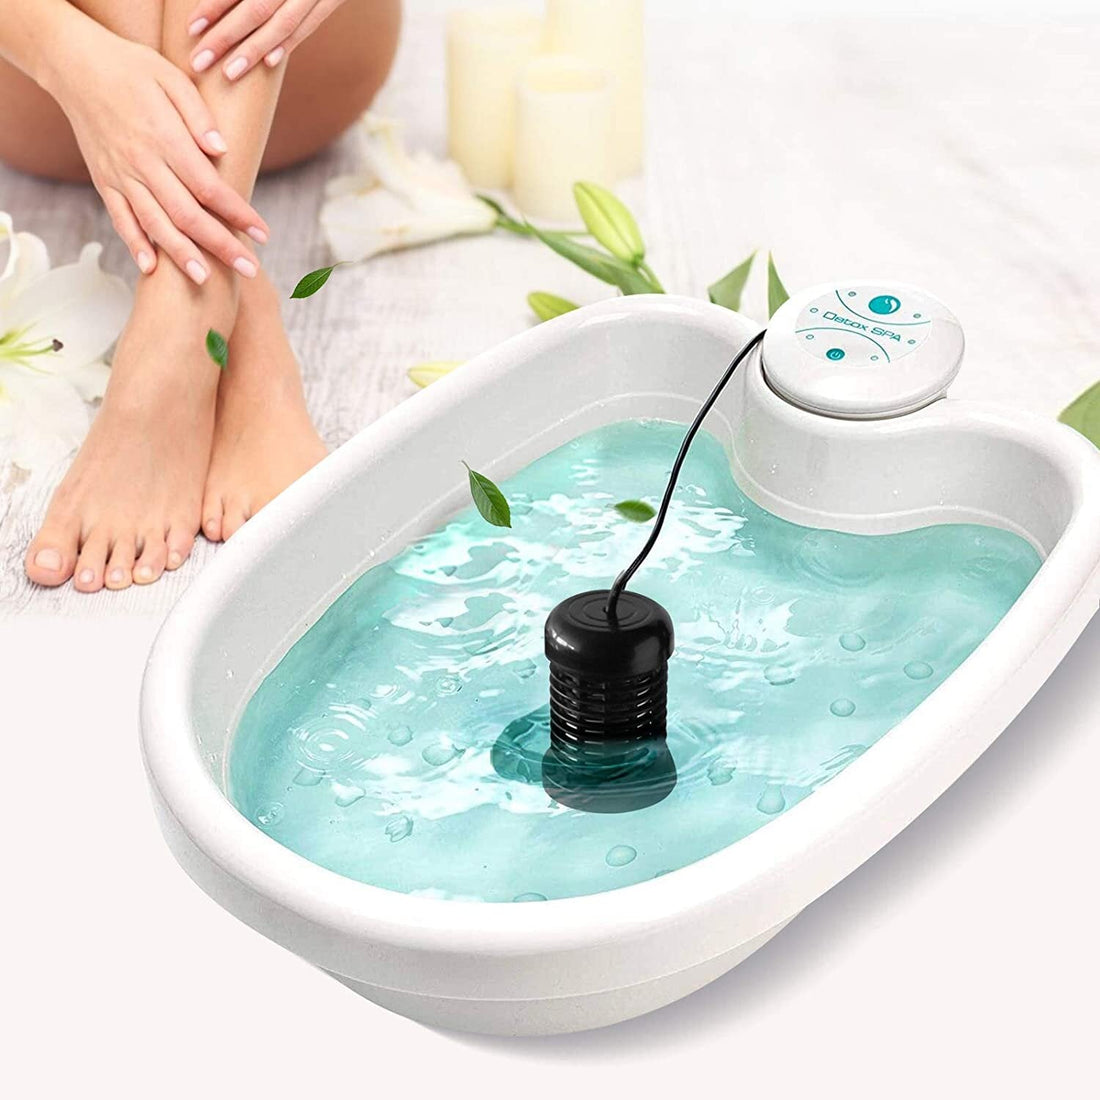 At-Home Ionic Detox Foot Spa Machine for Total Body Purification